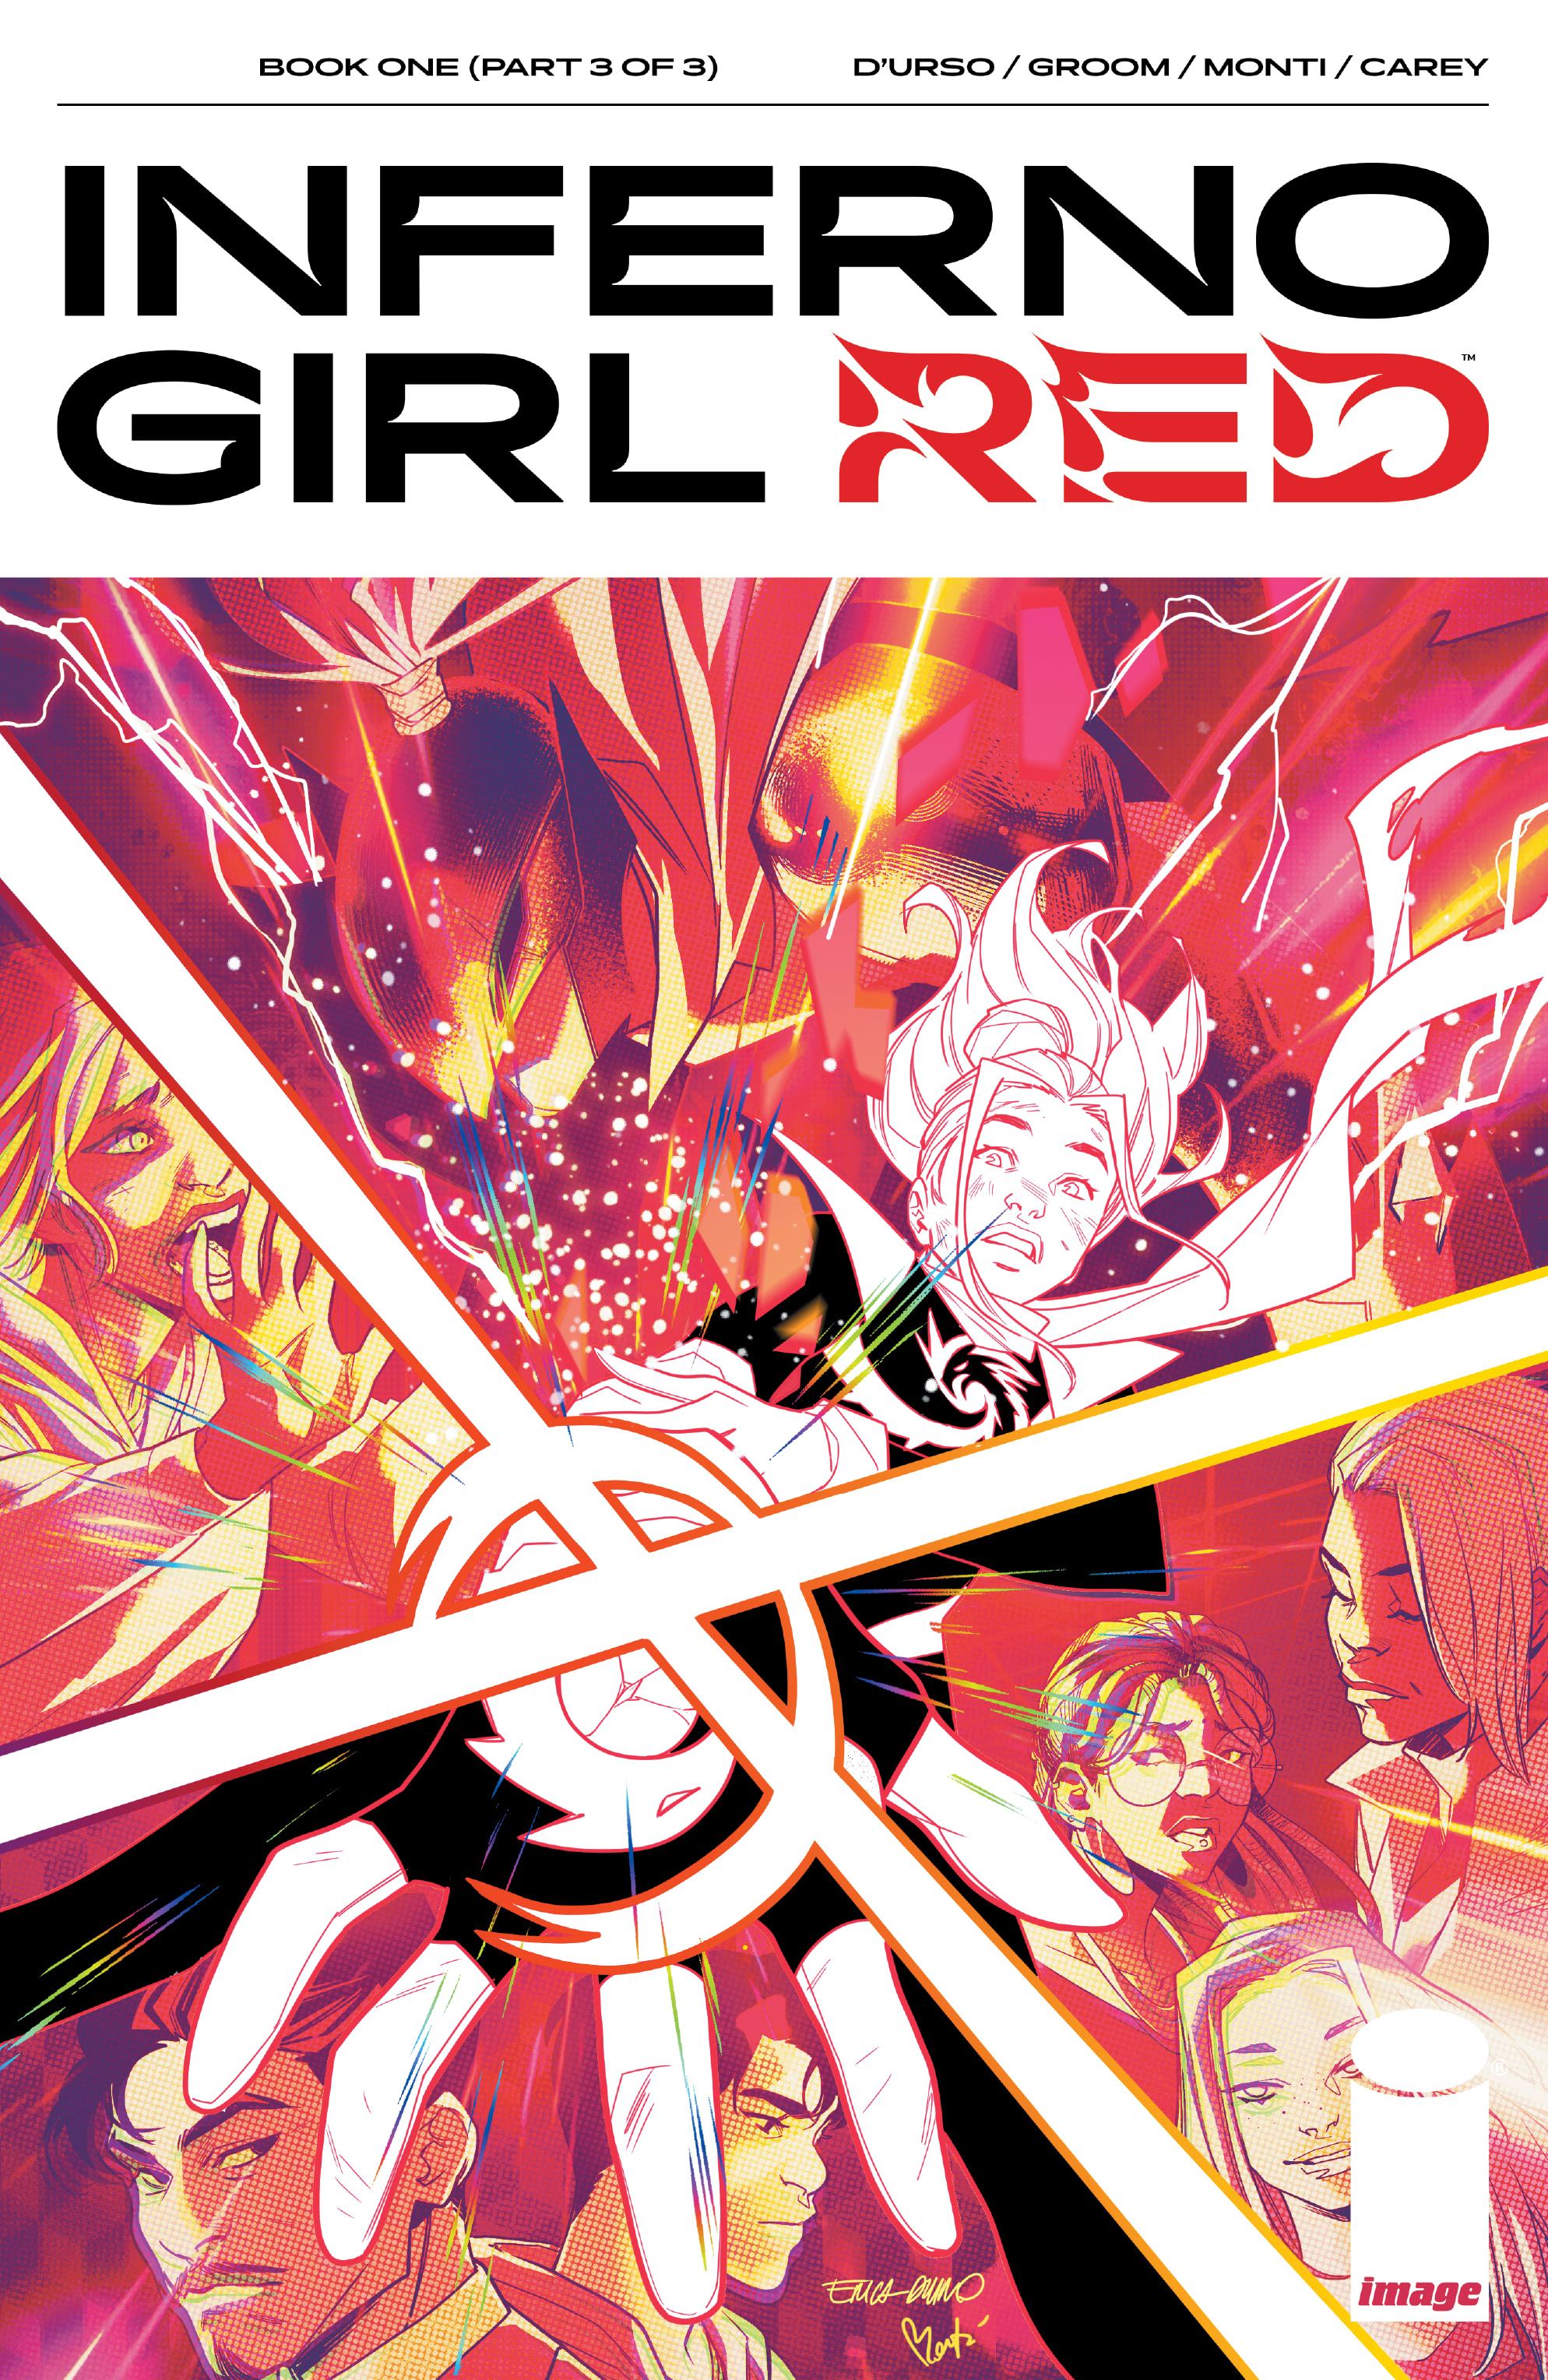 Read online Inferno Girl Red comic -  Issue #3 - 1